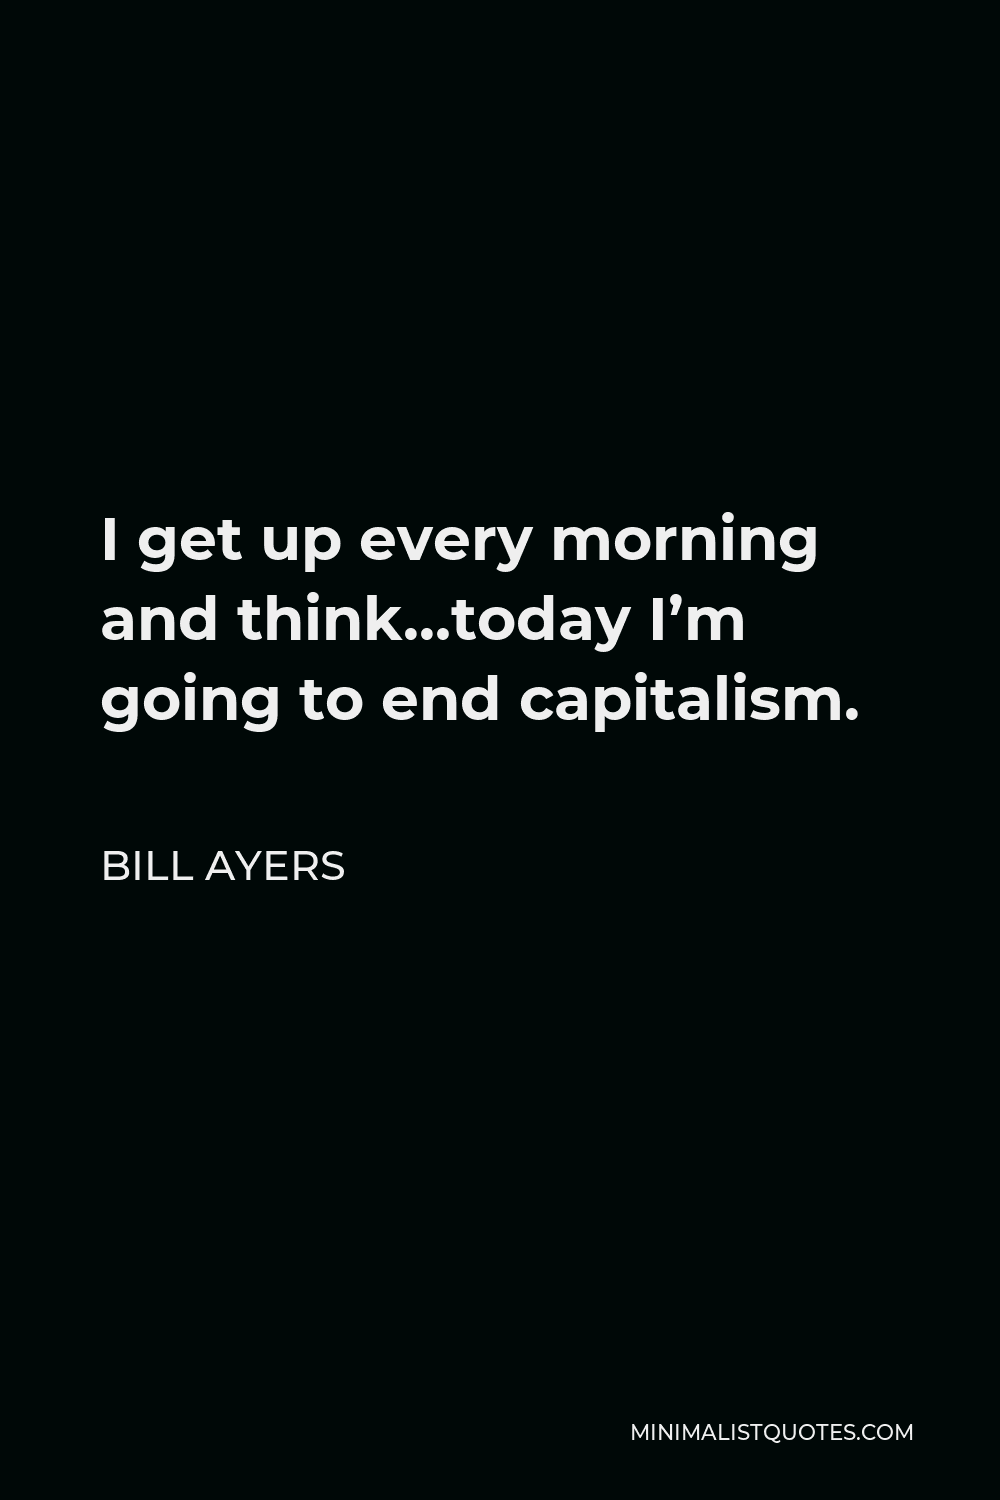 Bill Ayers Quote - I get up every morning and think…today I’m going to end capitalism.